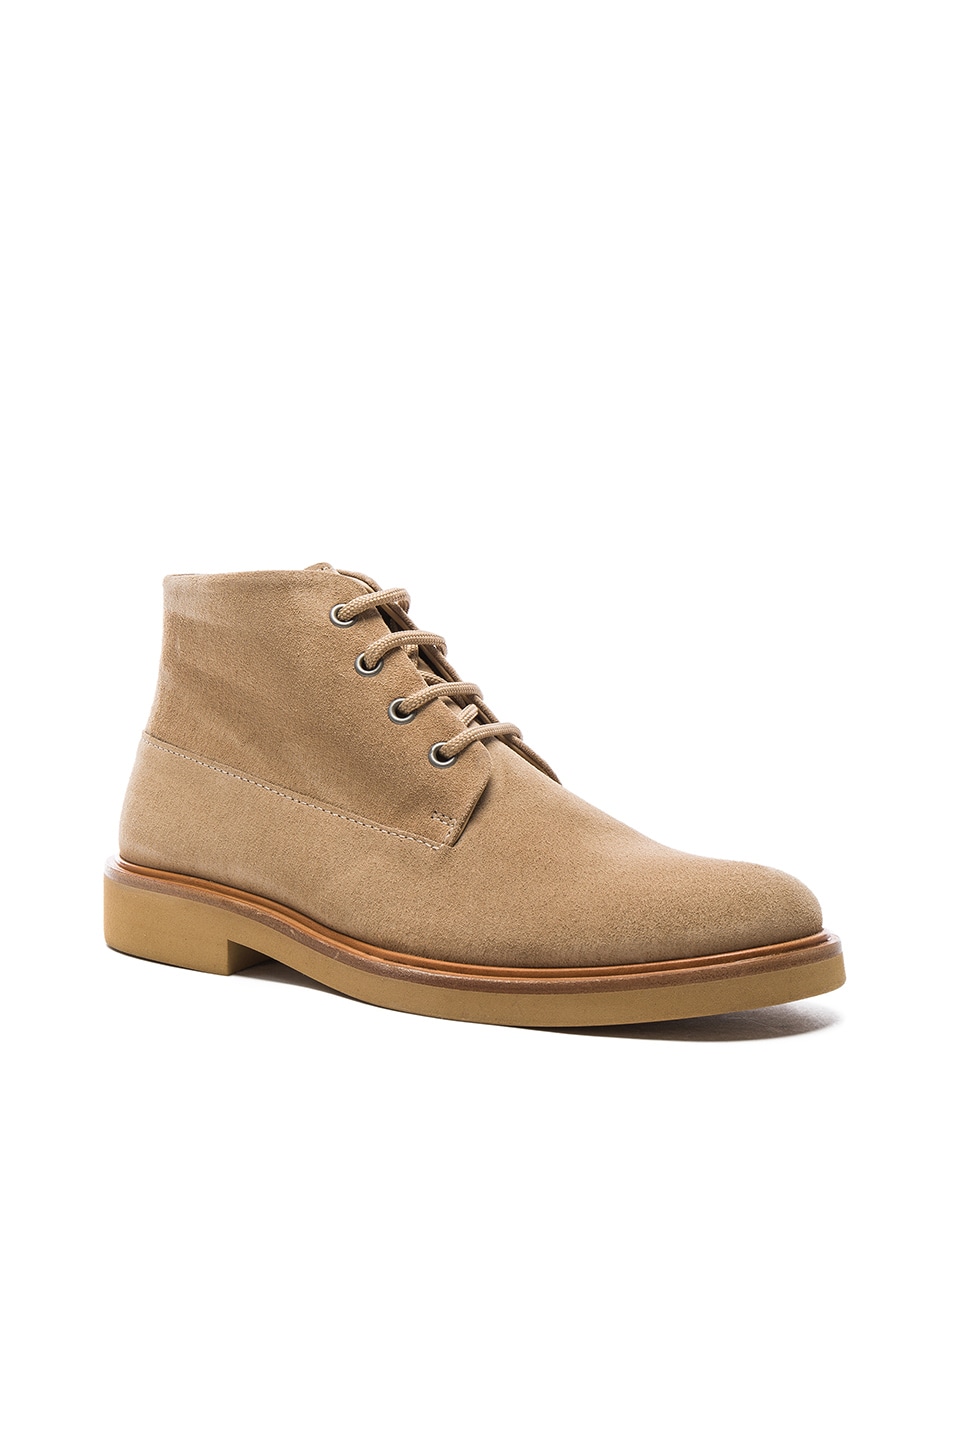 Image 1 of A.P.C. Suede Gaspard Boots in Beige